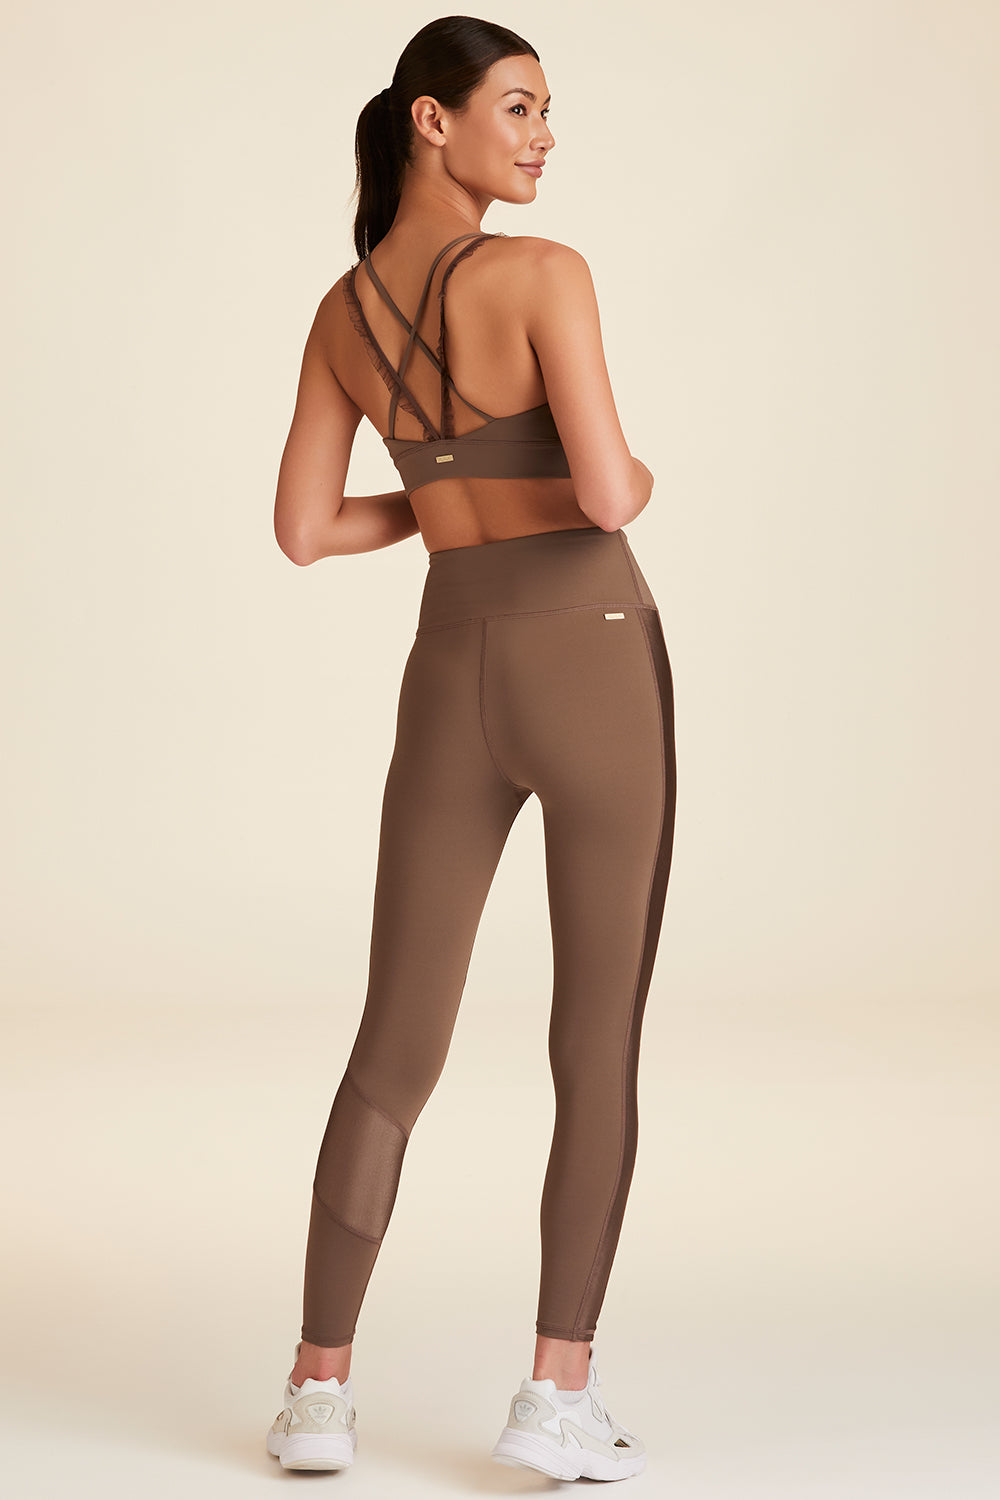 What is the story behind everyone's obsession with Lululemon's bestselling  Align pants and other activewear?